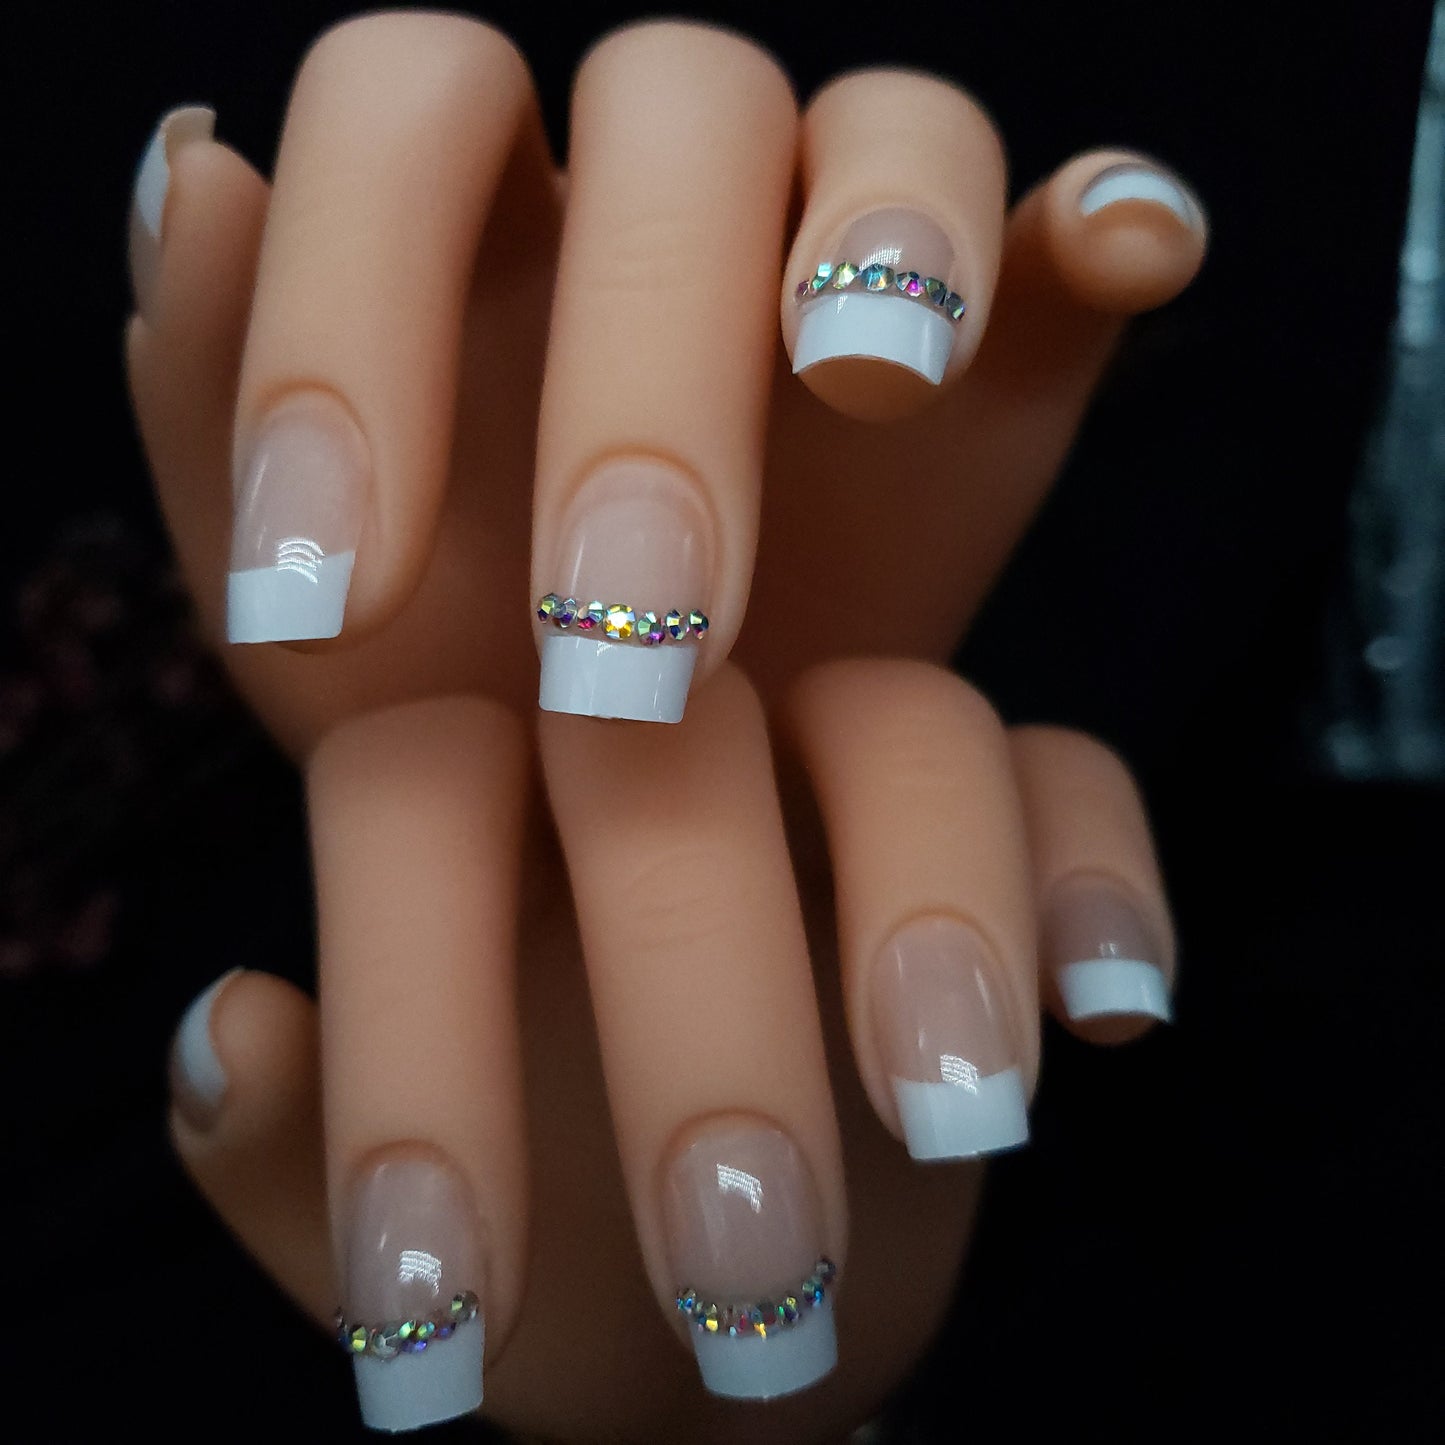 24 French Tip Manicure Nude White Rhinestone gem Press on Nails classic Glue on boomer square